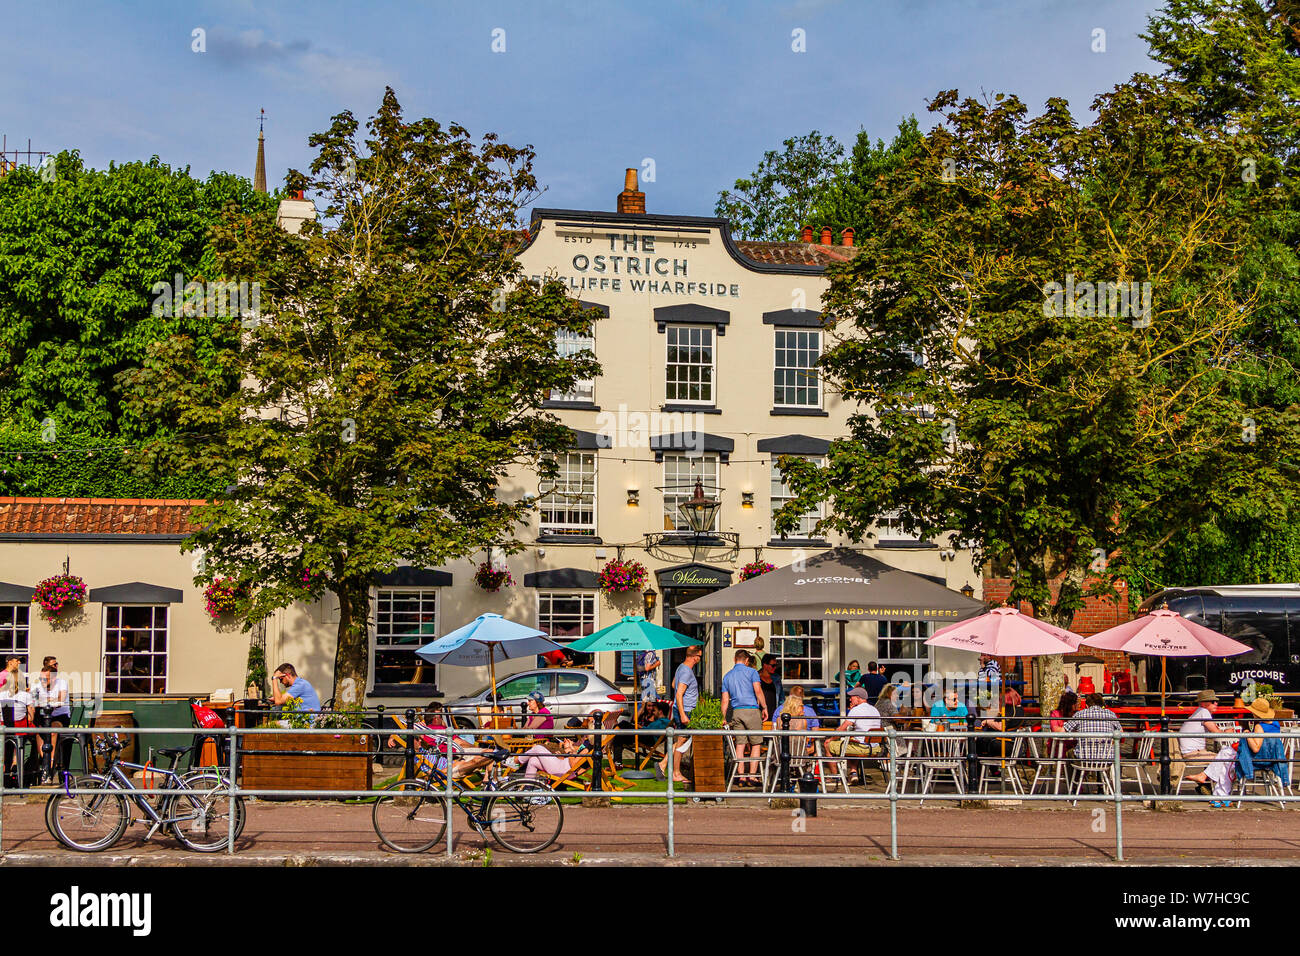 The Ostrich, a historic harbourside pub now run by Butcombe Brewery, on a sunny summer day with people enjoying the garden. Bristol, UK. July 2019. Stock Photo